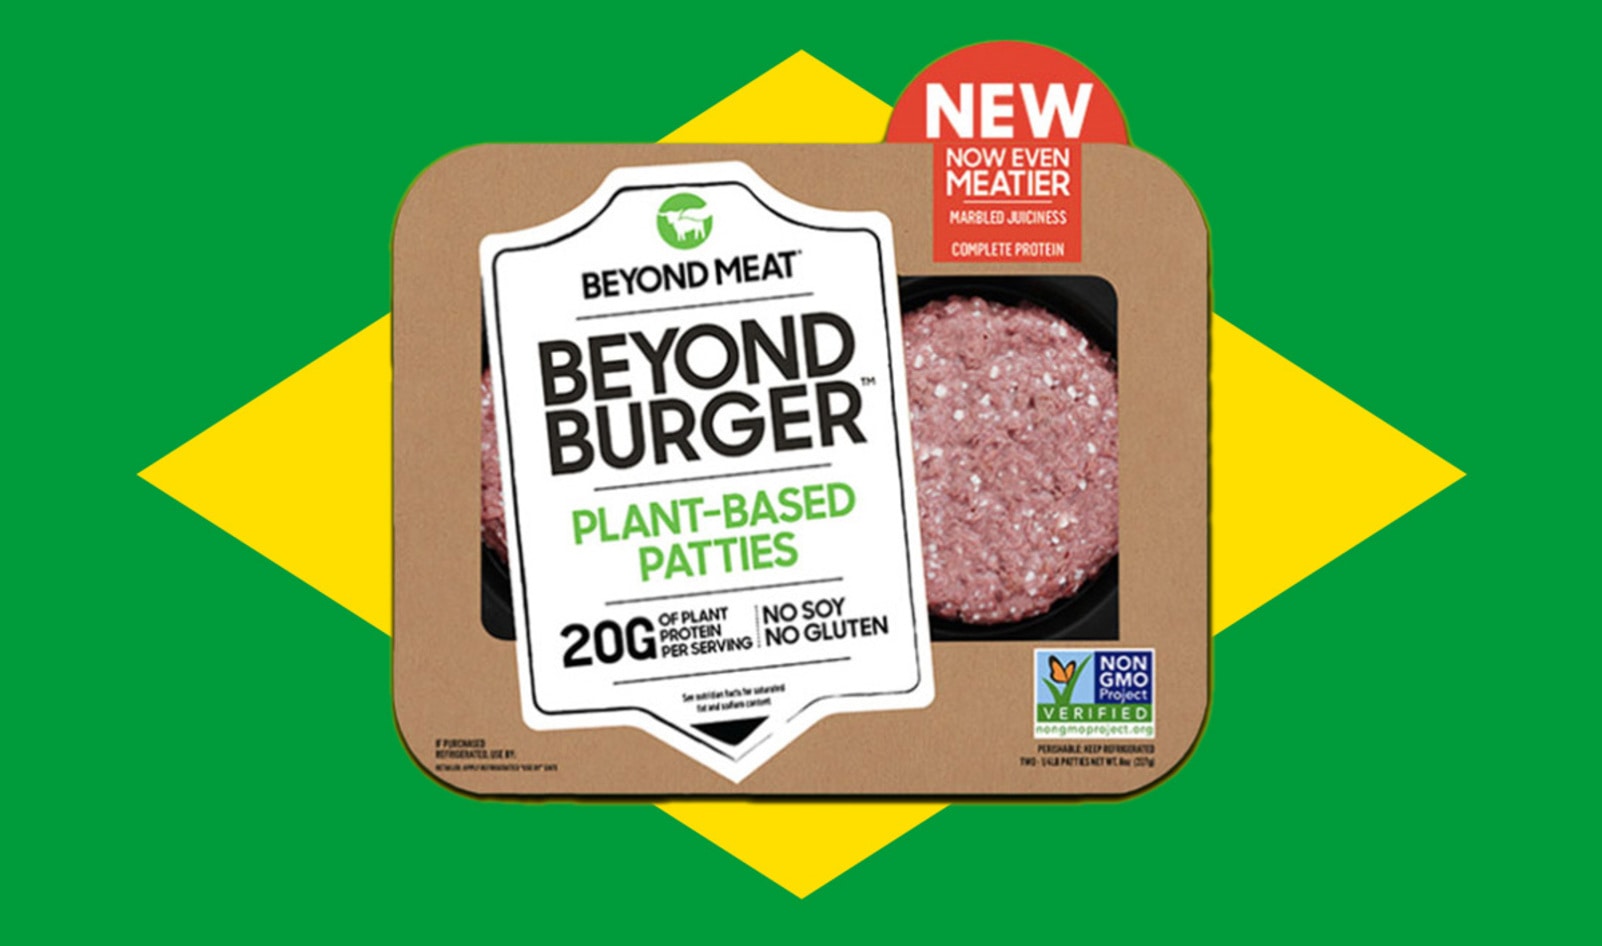 &nbsp;Beyond Meat Debuts in Brazil, the World’s Third Largest Meat-Consuming Country&nbsp;